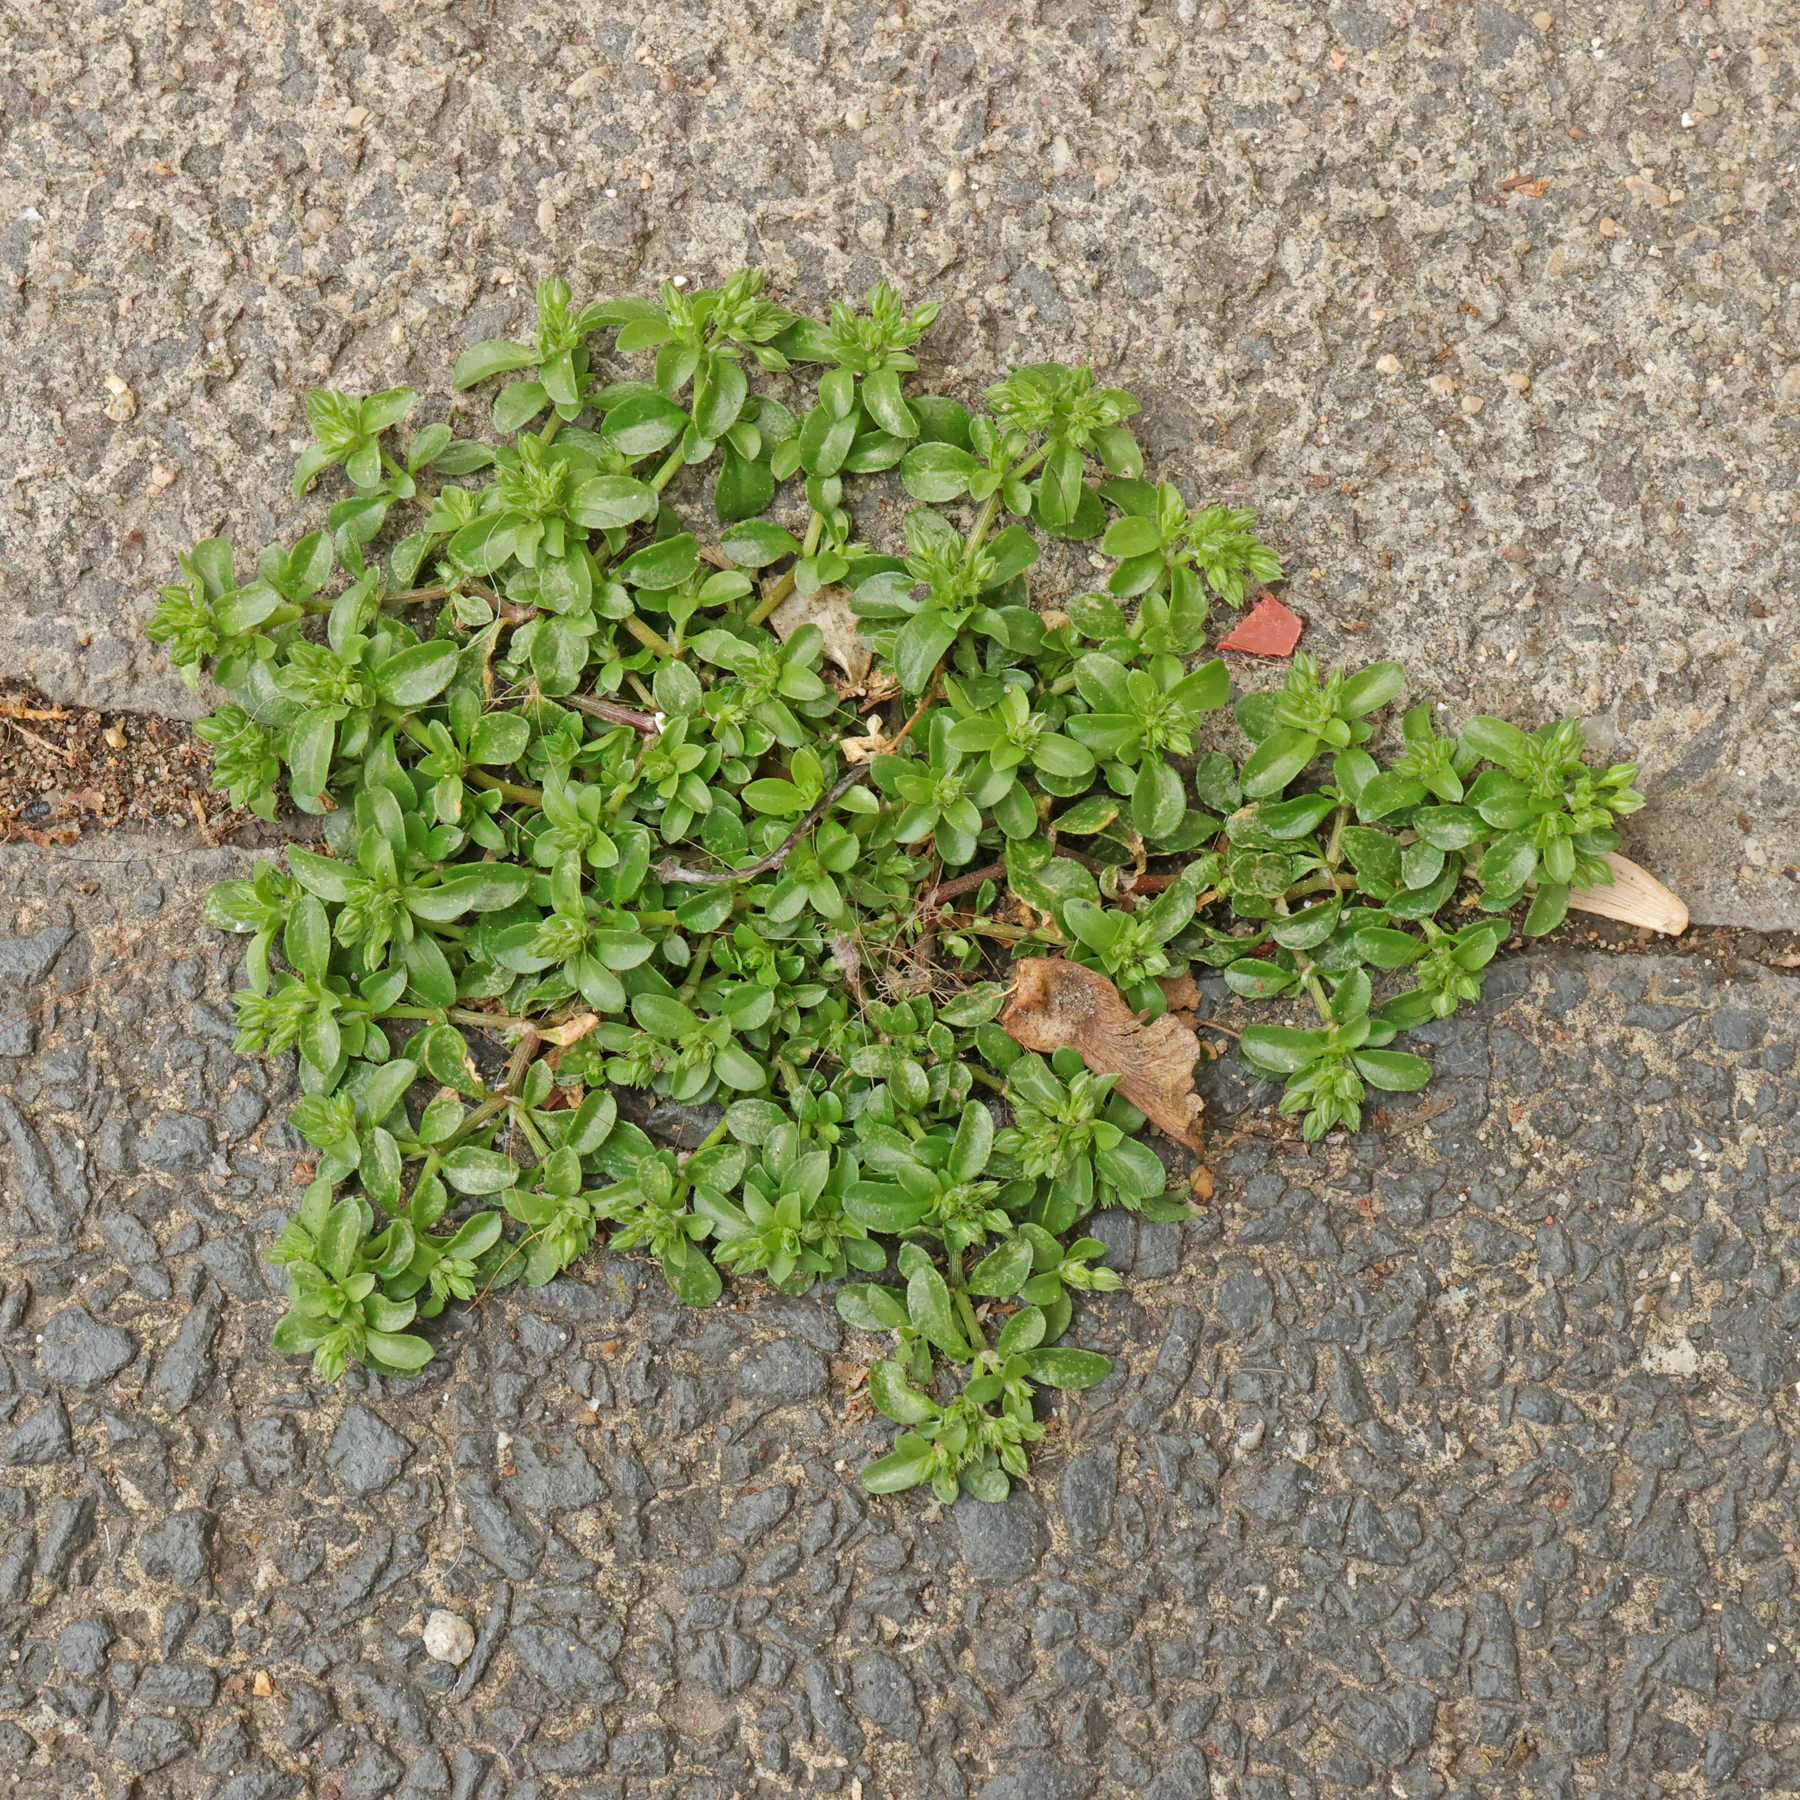 fourleaf manyseed in paving